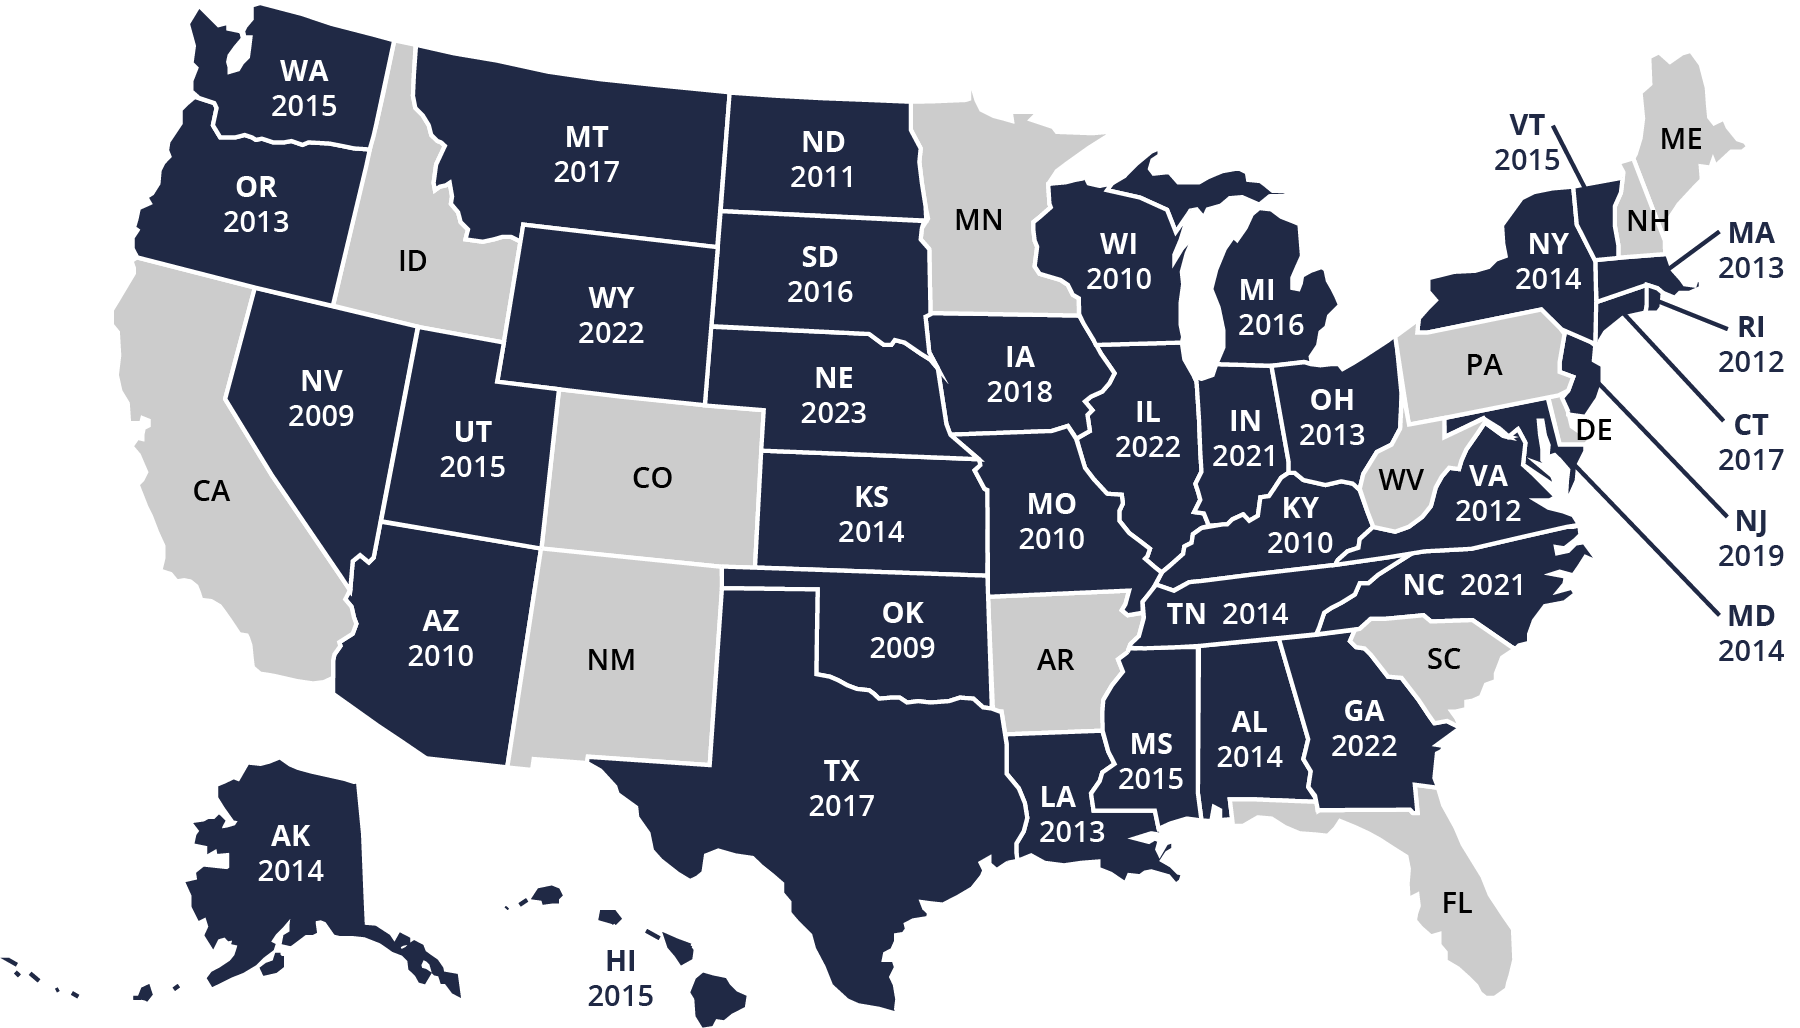 map of the United States showcasing when each state enacted licensure of behavior analysis